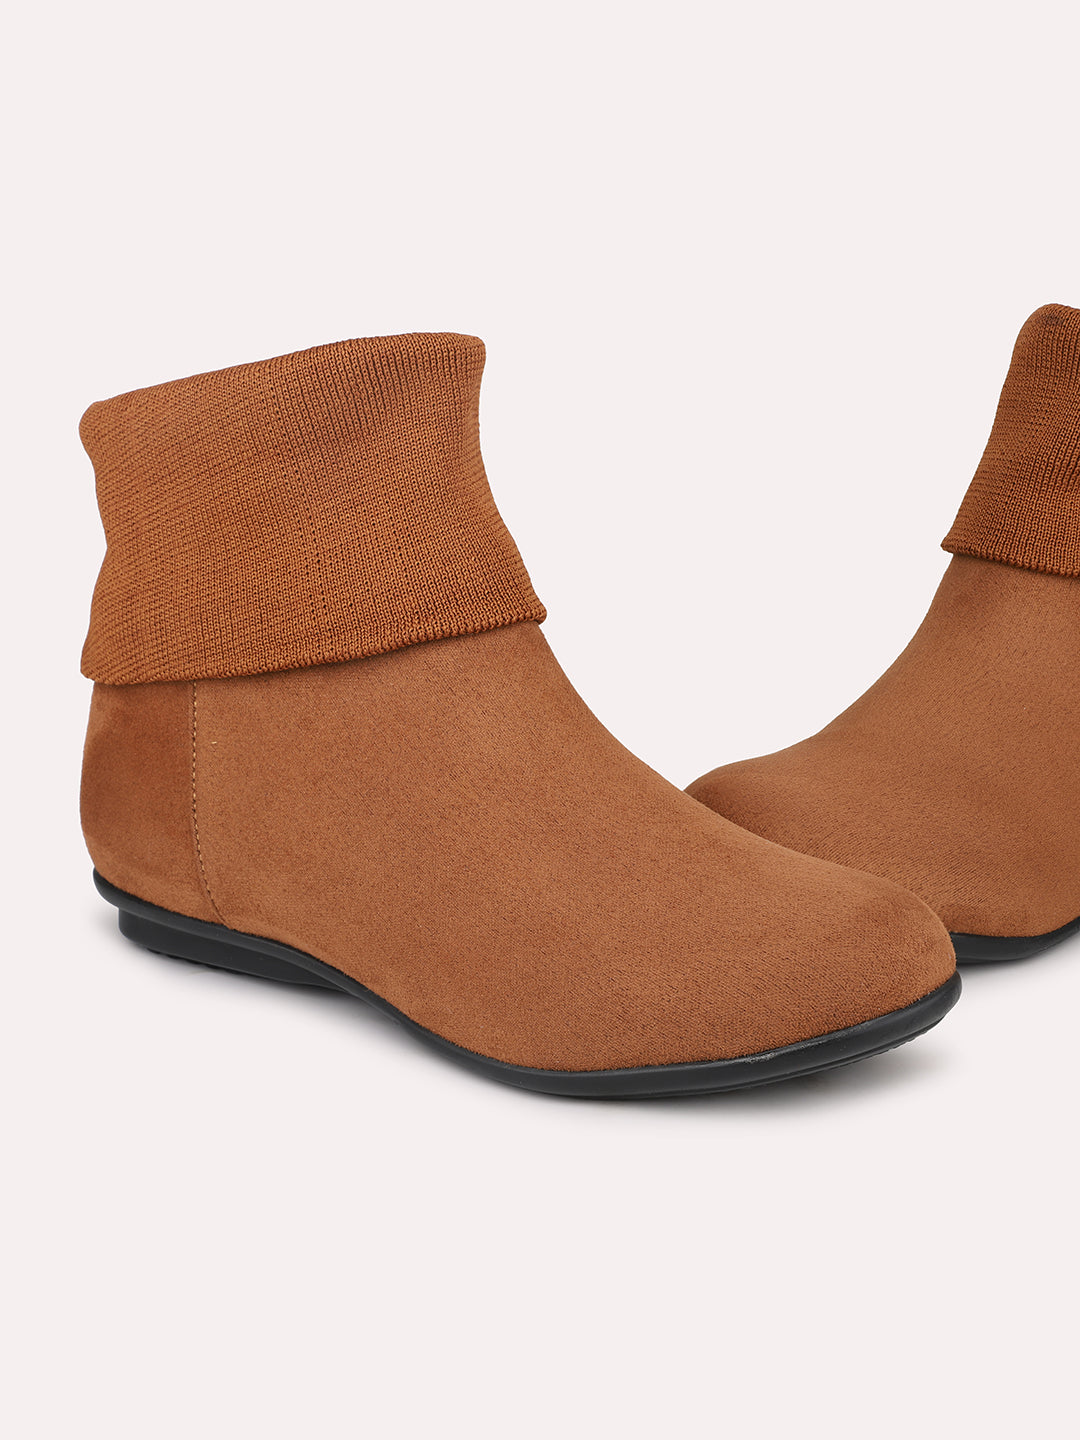 Women Tan Solid Suede Flat Boots